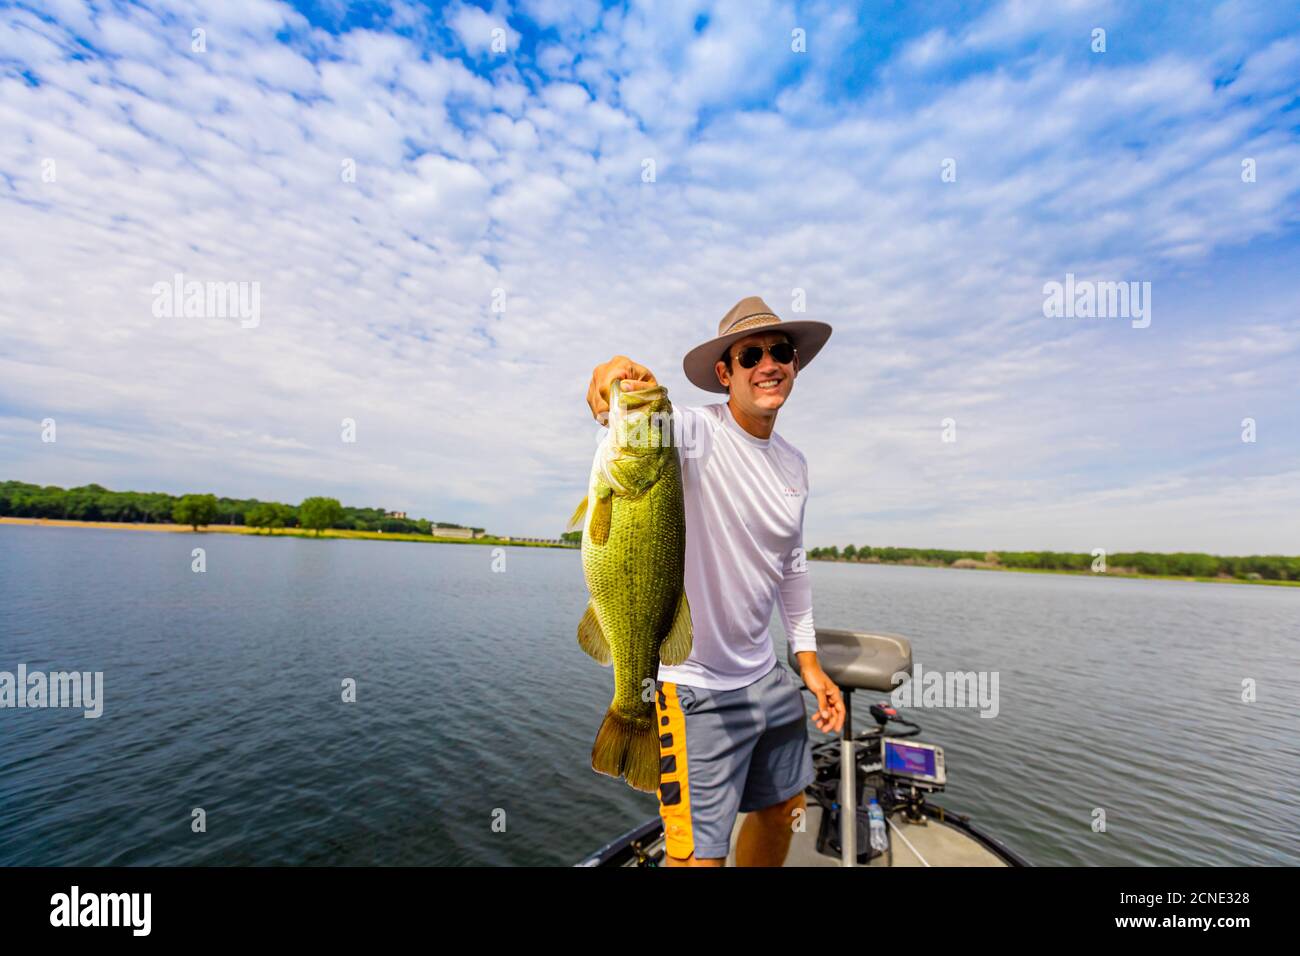 Man showing off his big catch of the day fishing on Yellowstone River, South Dakota, United States of America Stock Photo